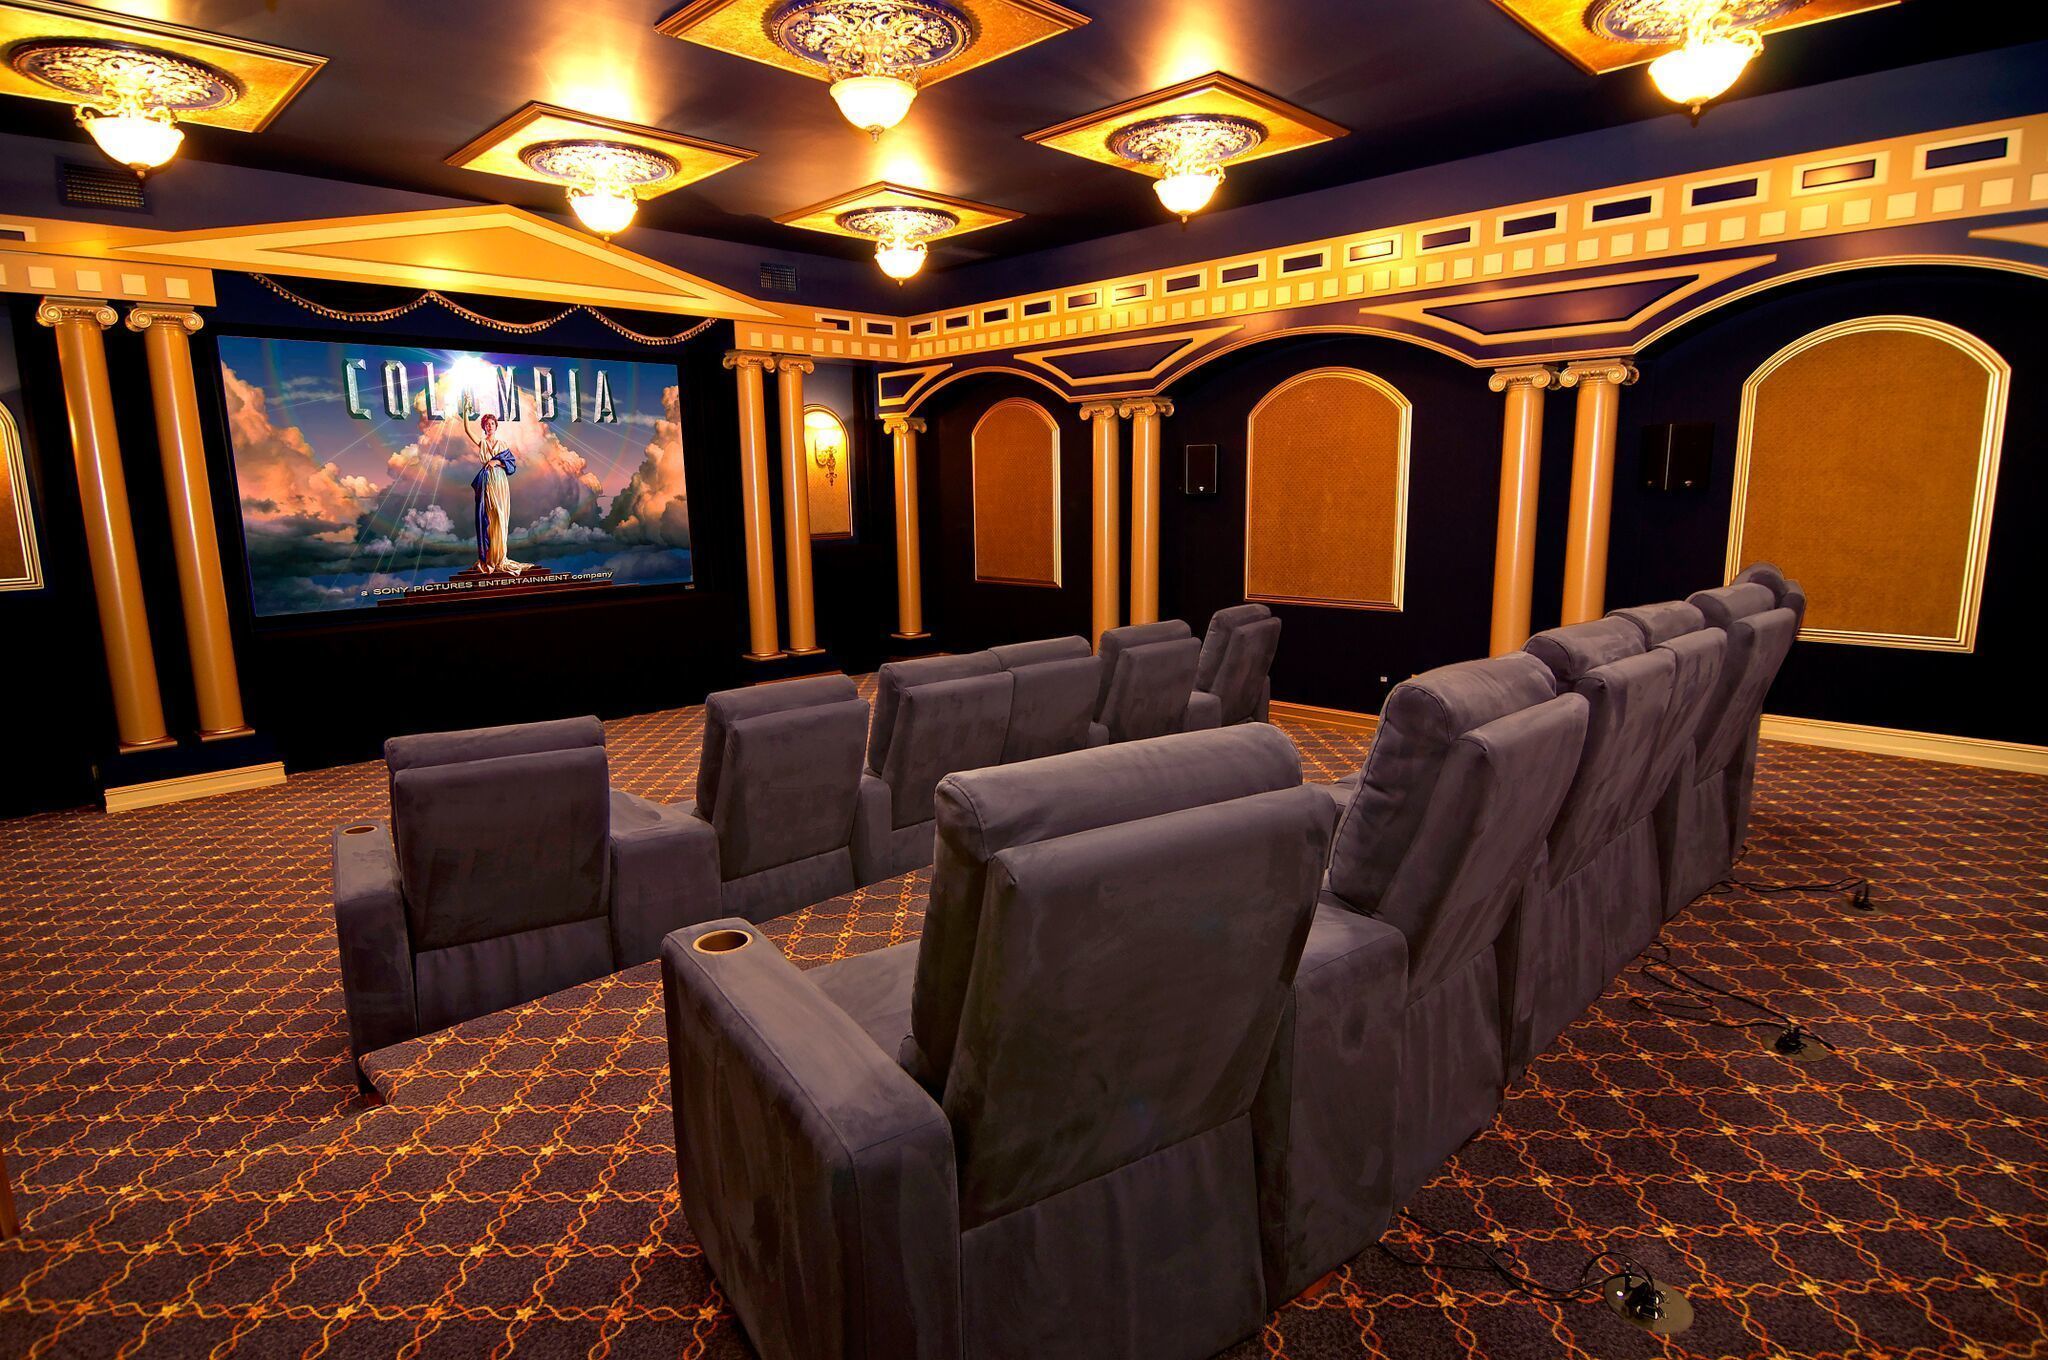 Movie nights in style: Check out these luxury home theaters - Sun Sentinel